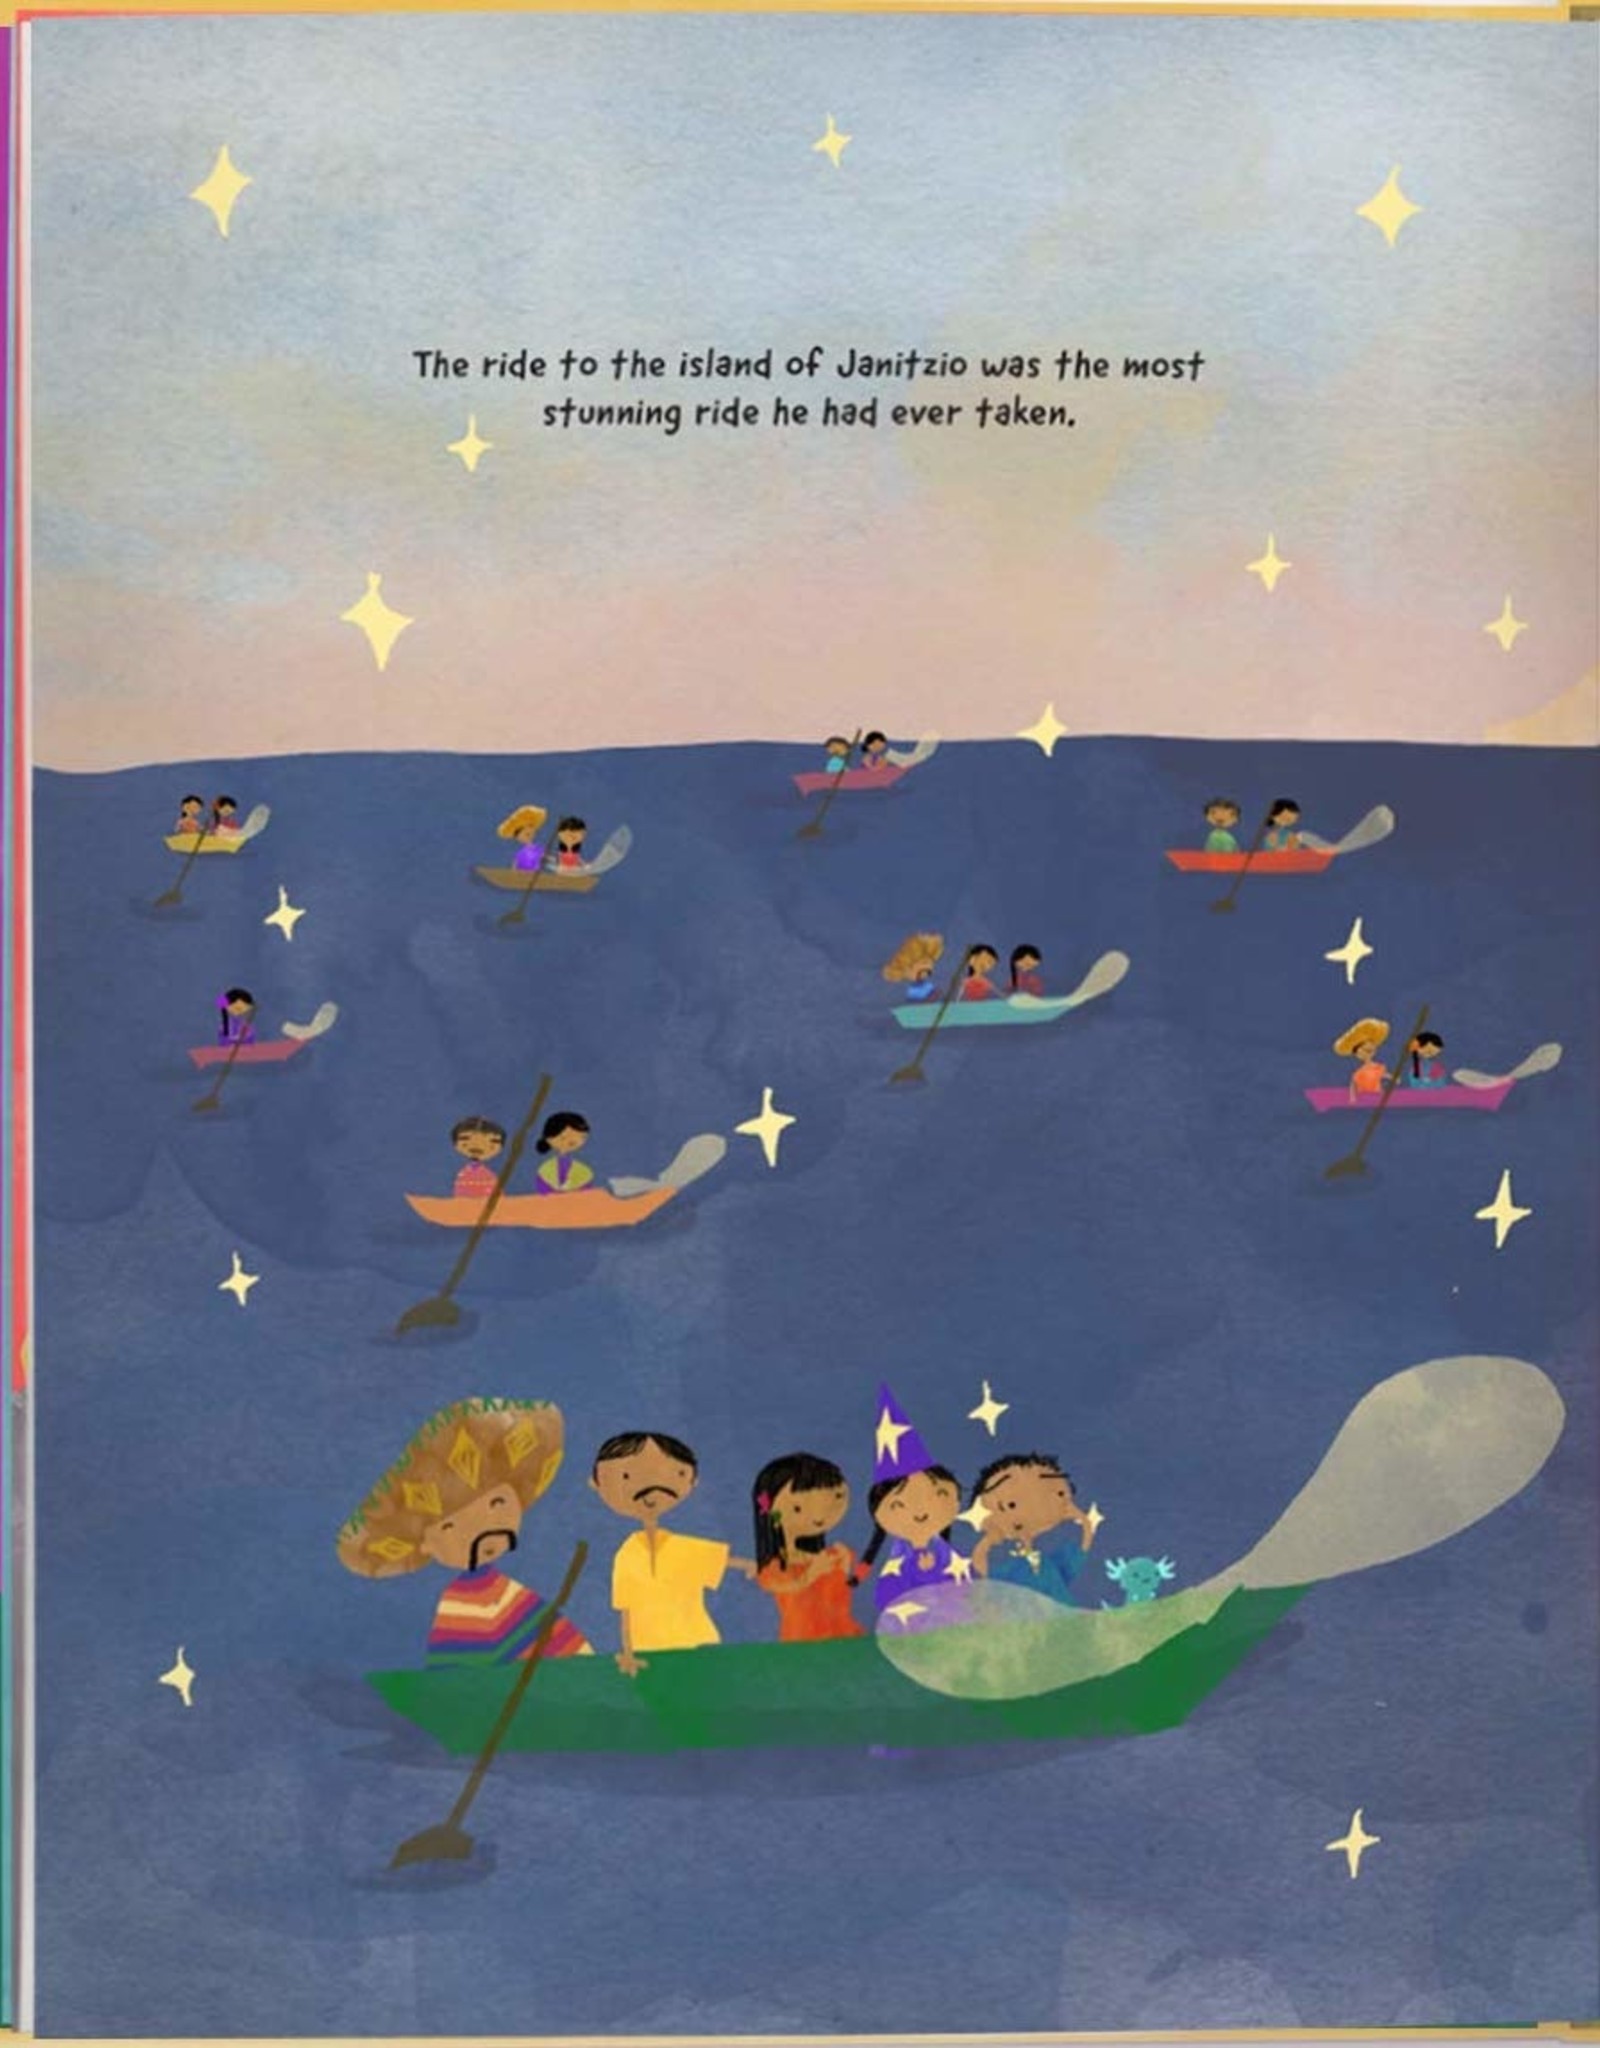 Worldwide Buddies A Marvelous Mexican Misunderstanding picture book